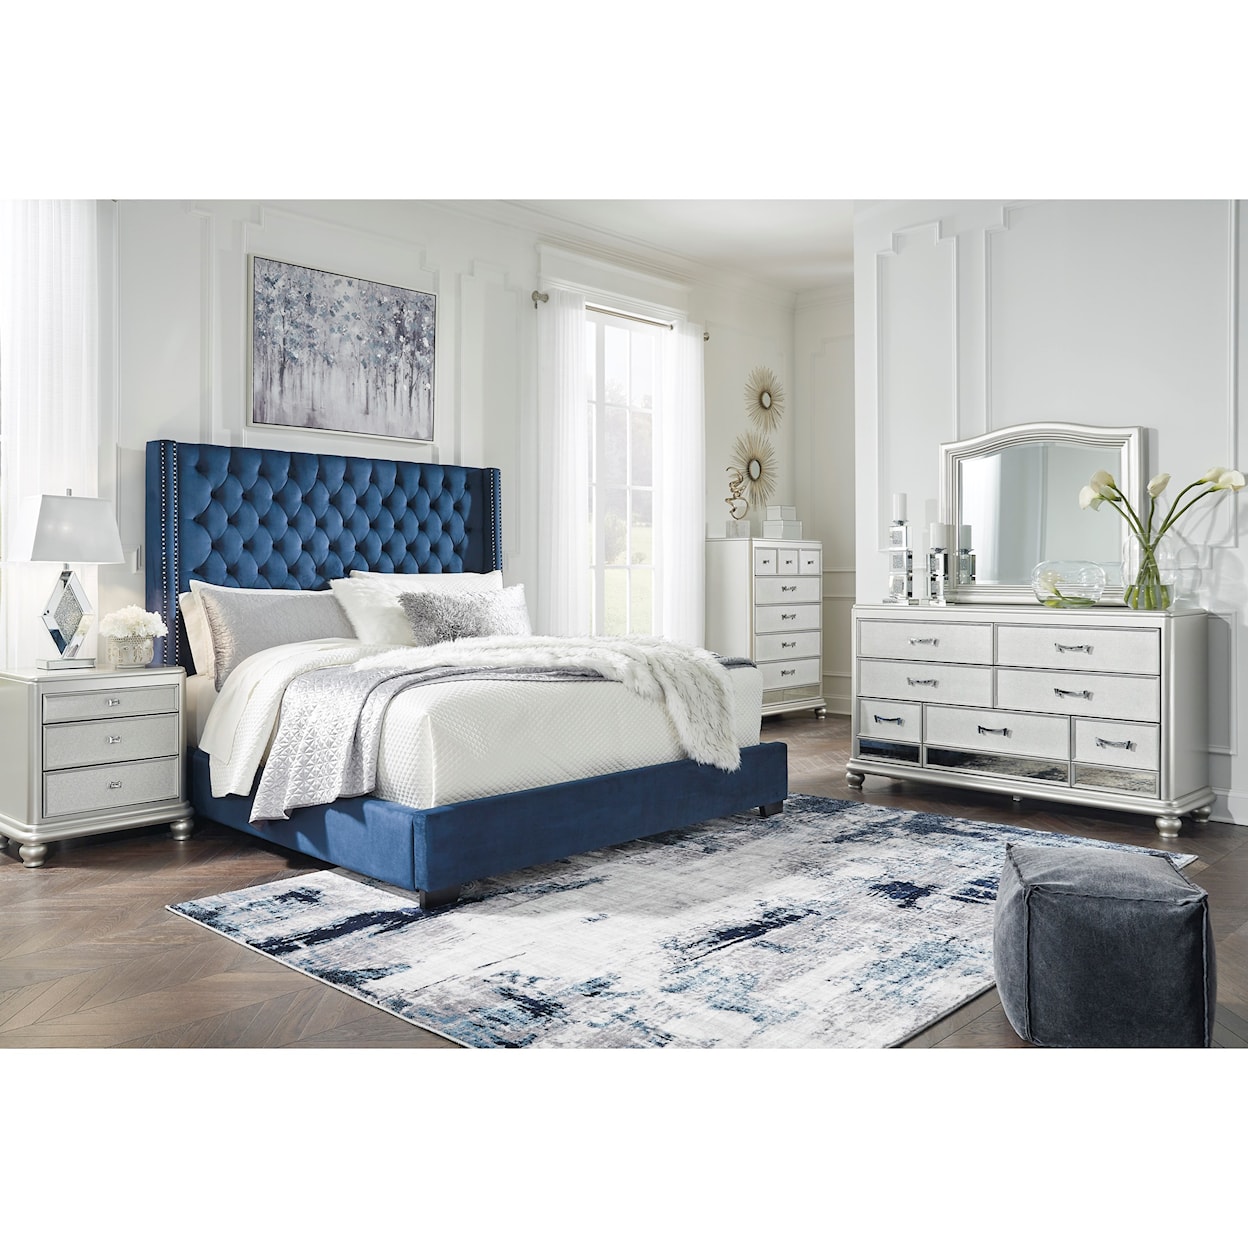 Signature Design by Ashley Coralayne King Bedroom Group